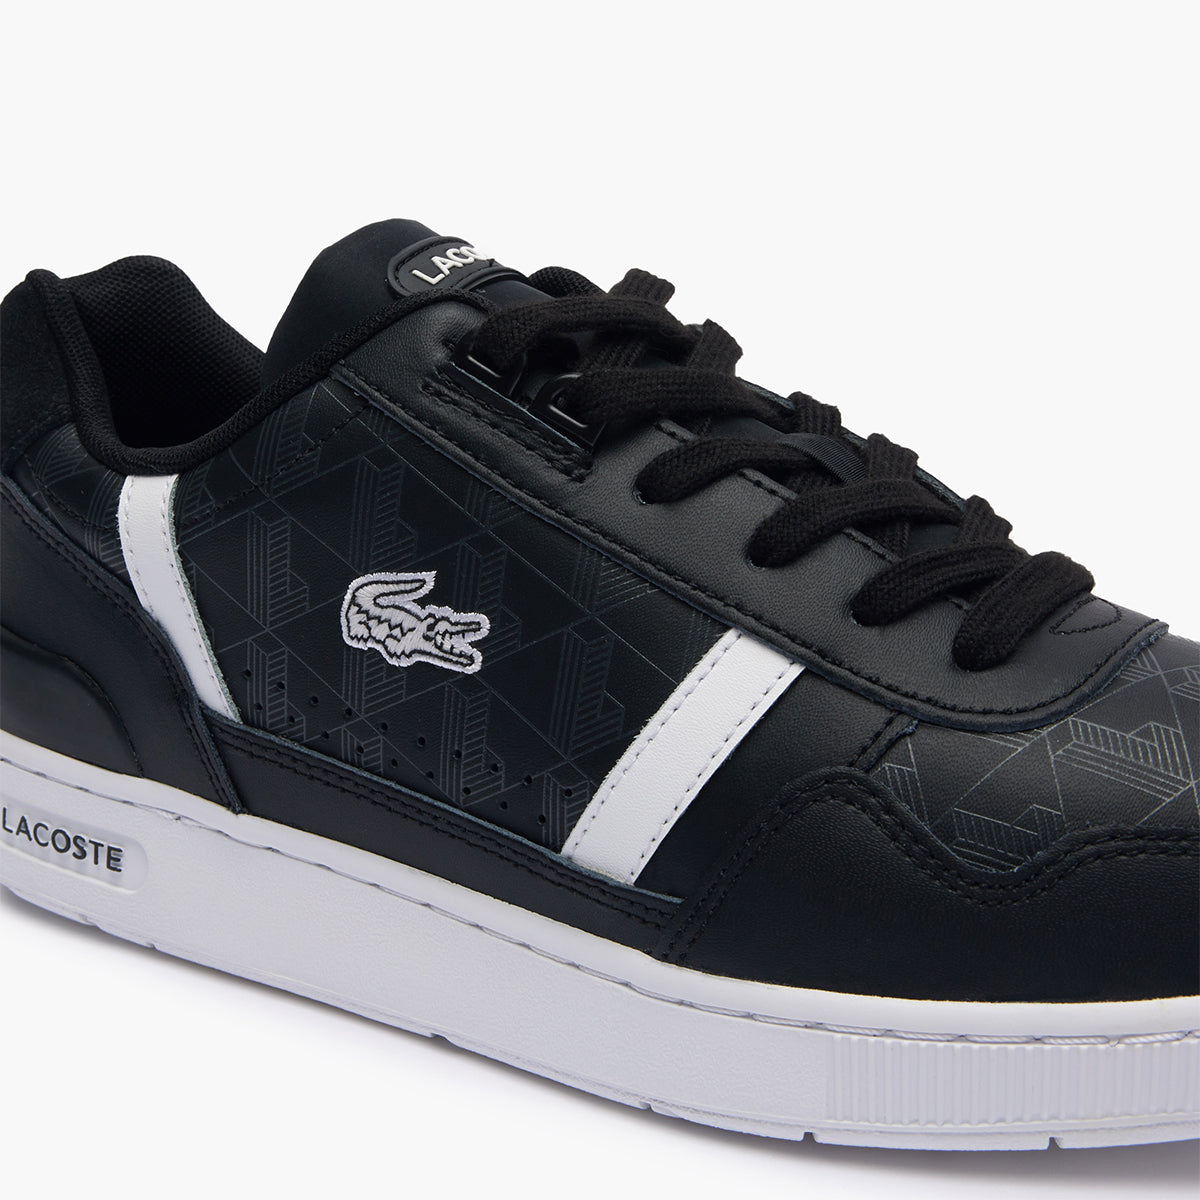 Lacoste T-Clip Printed Leather Trainers | LEVISONS